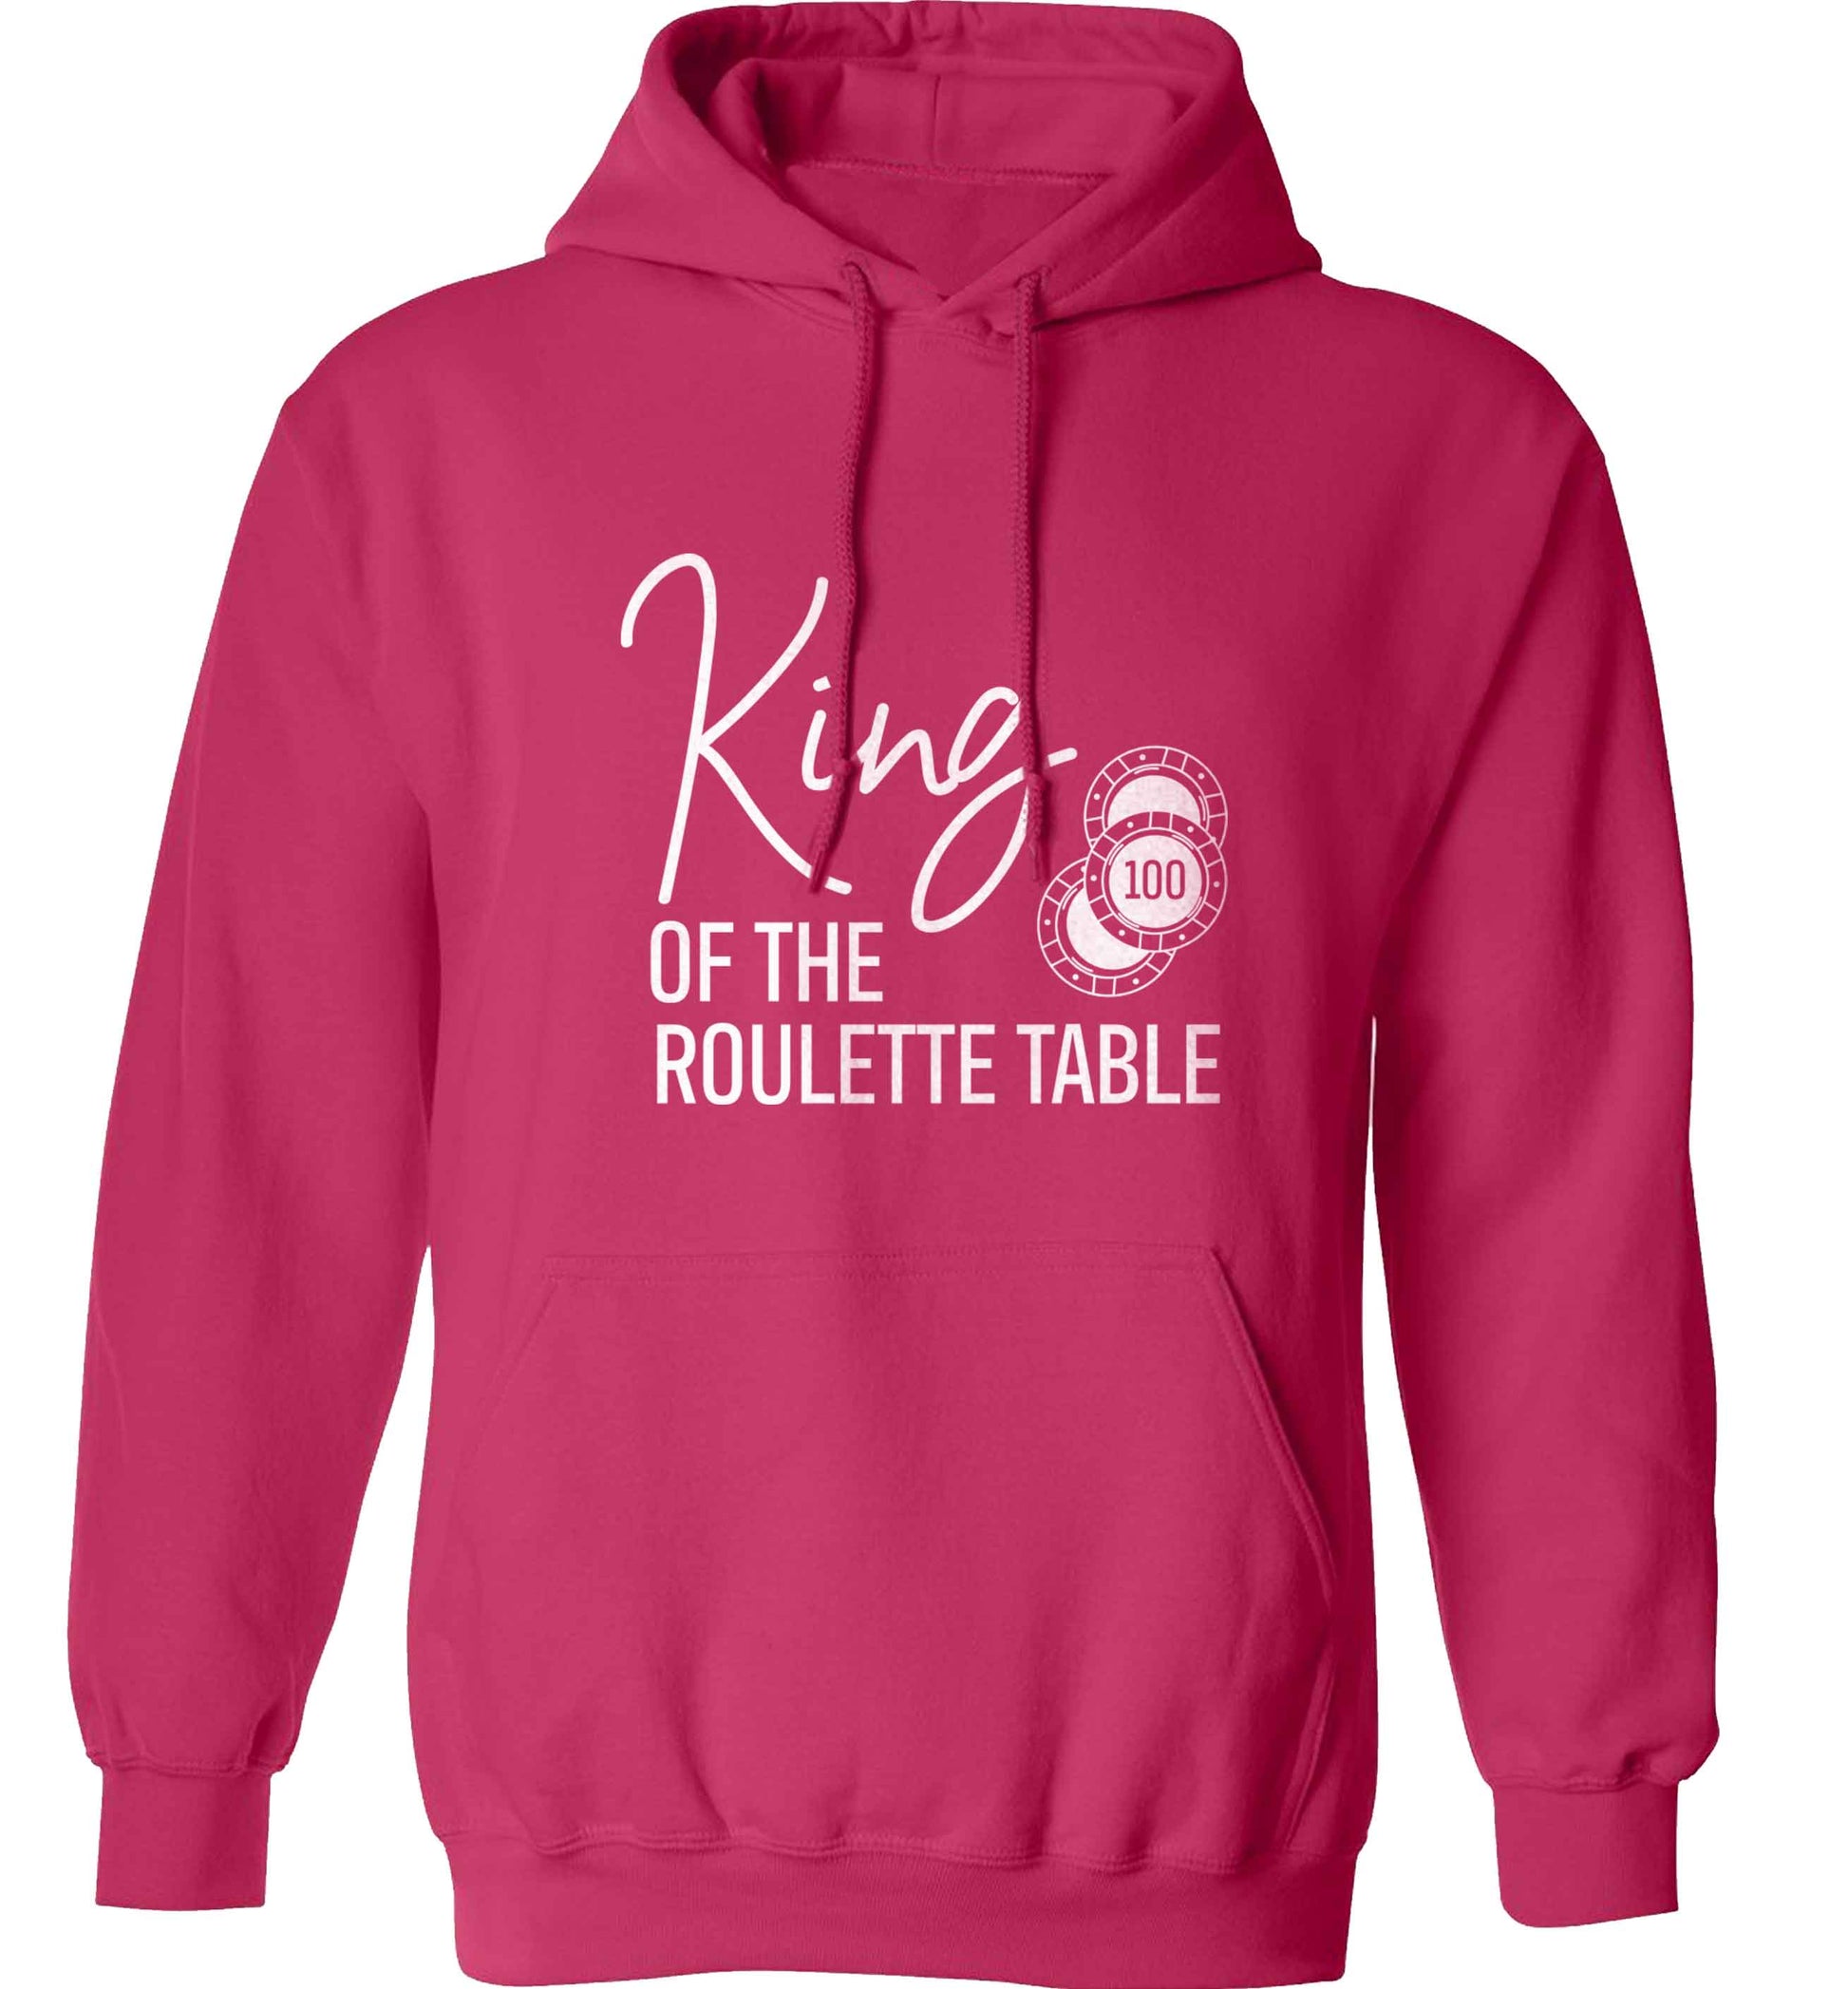 King of the roulette table adults unisex pink hoodie 2XL